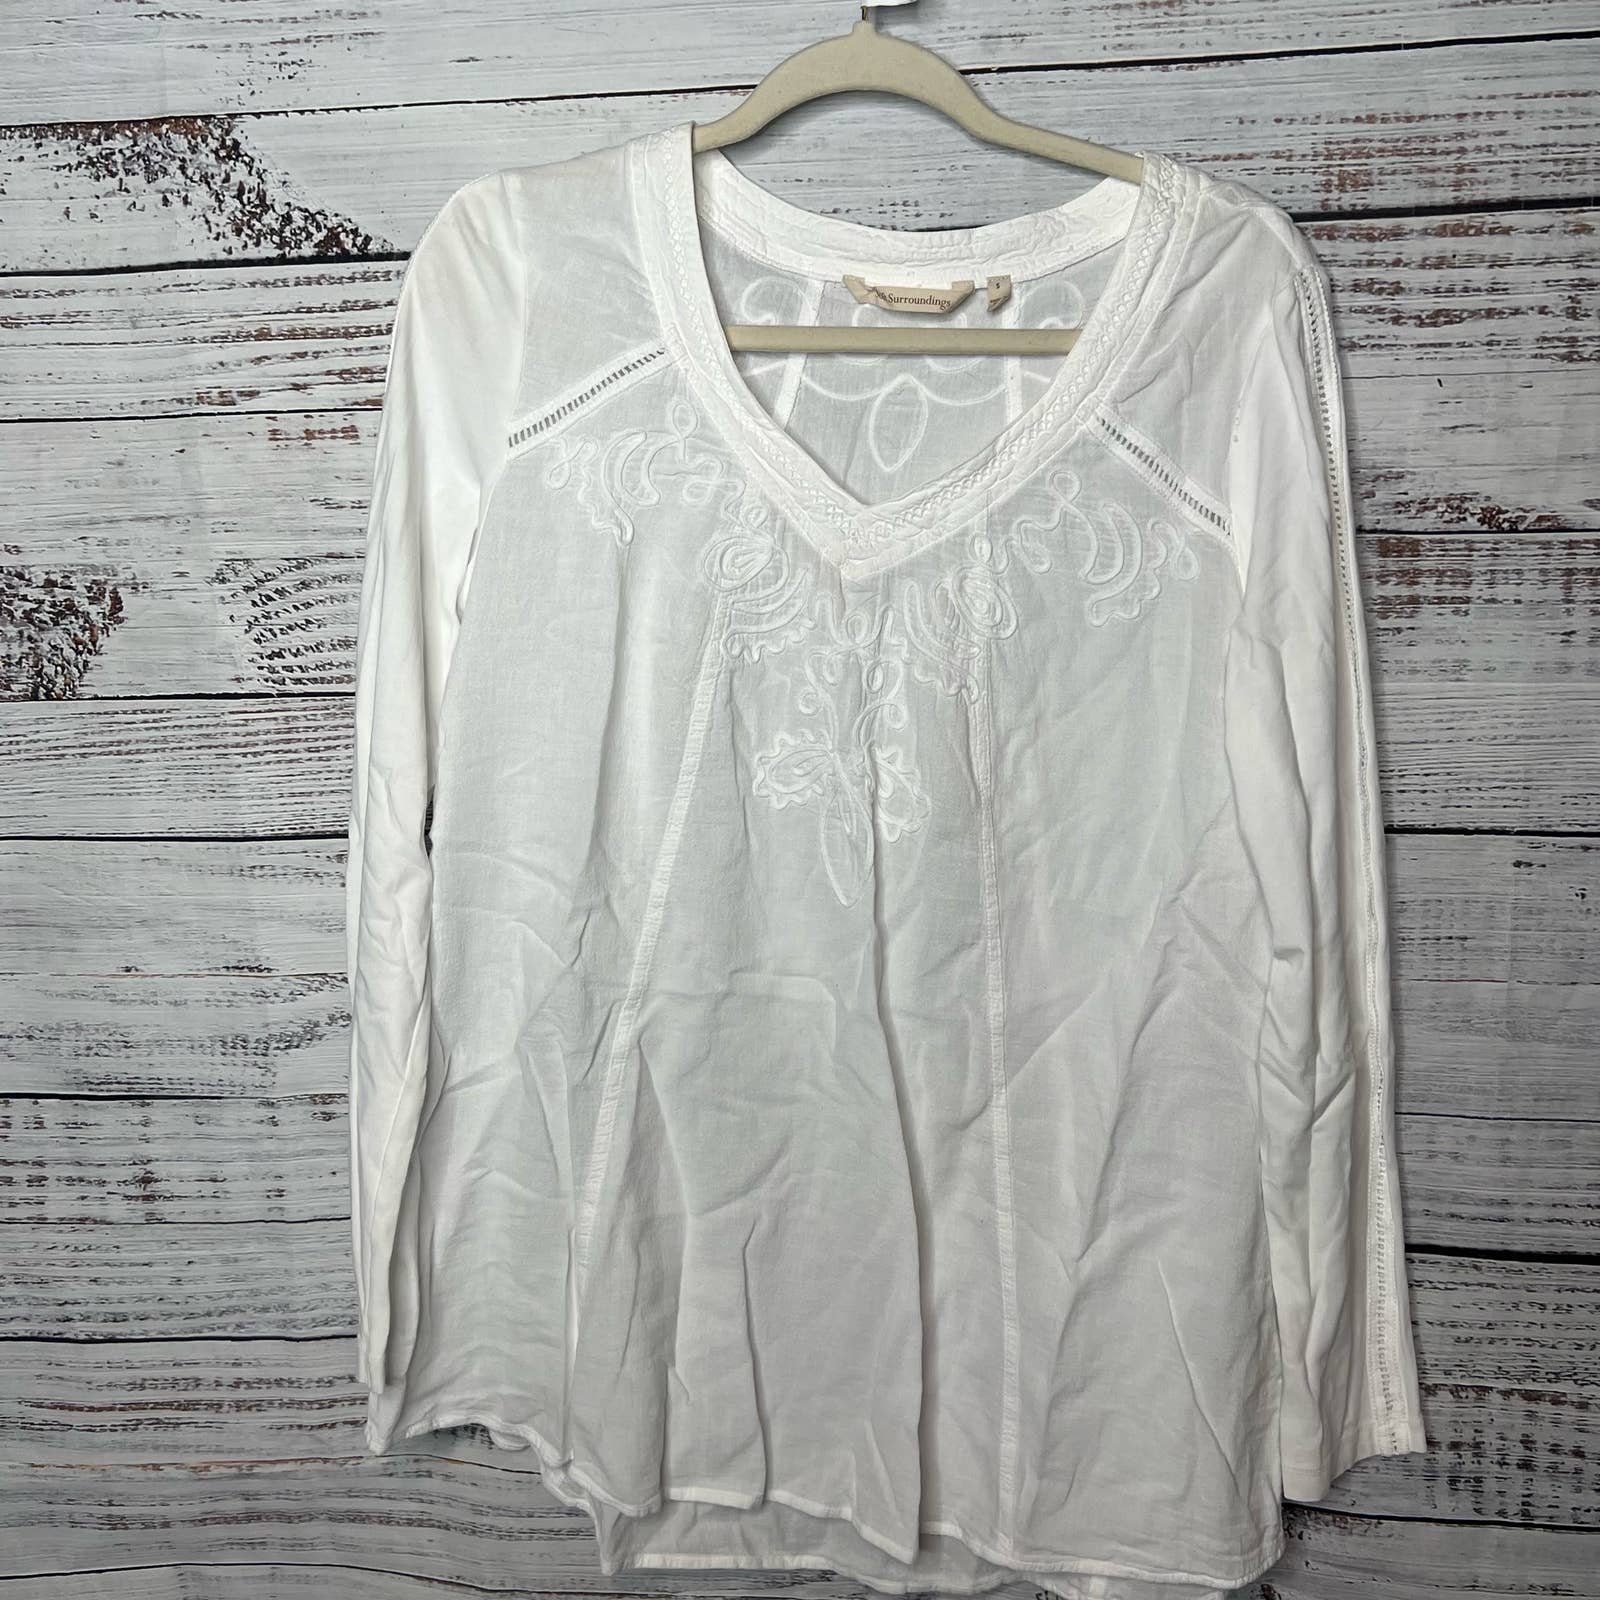 Comfortable Soft Surroundings White Embroidered Long Sleeve Cotton V Neck Tunic Sm K6LBO22Iw Hot Sale